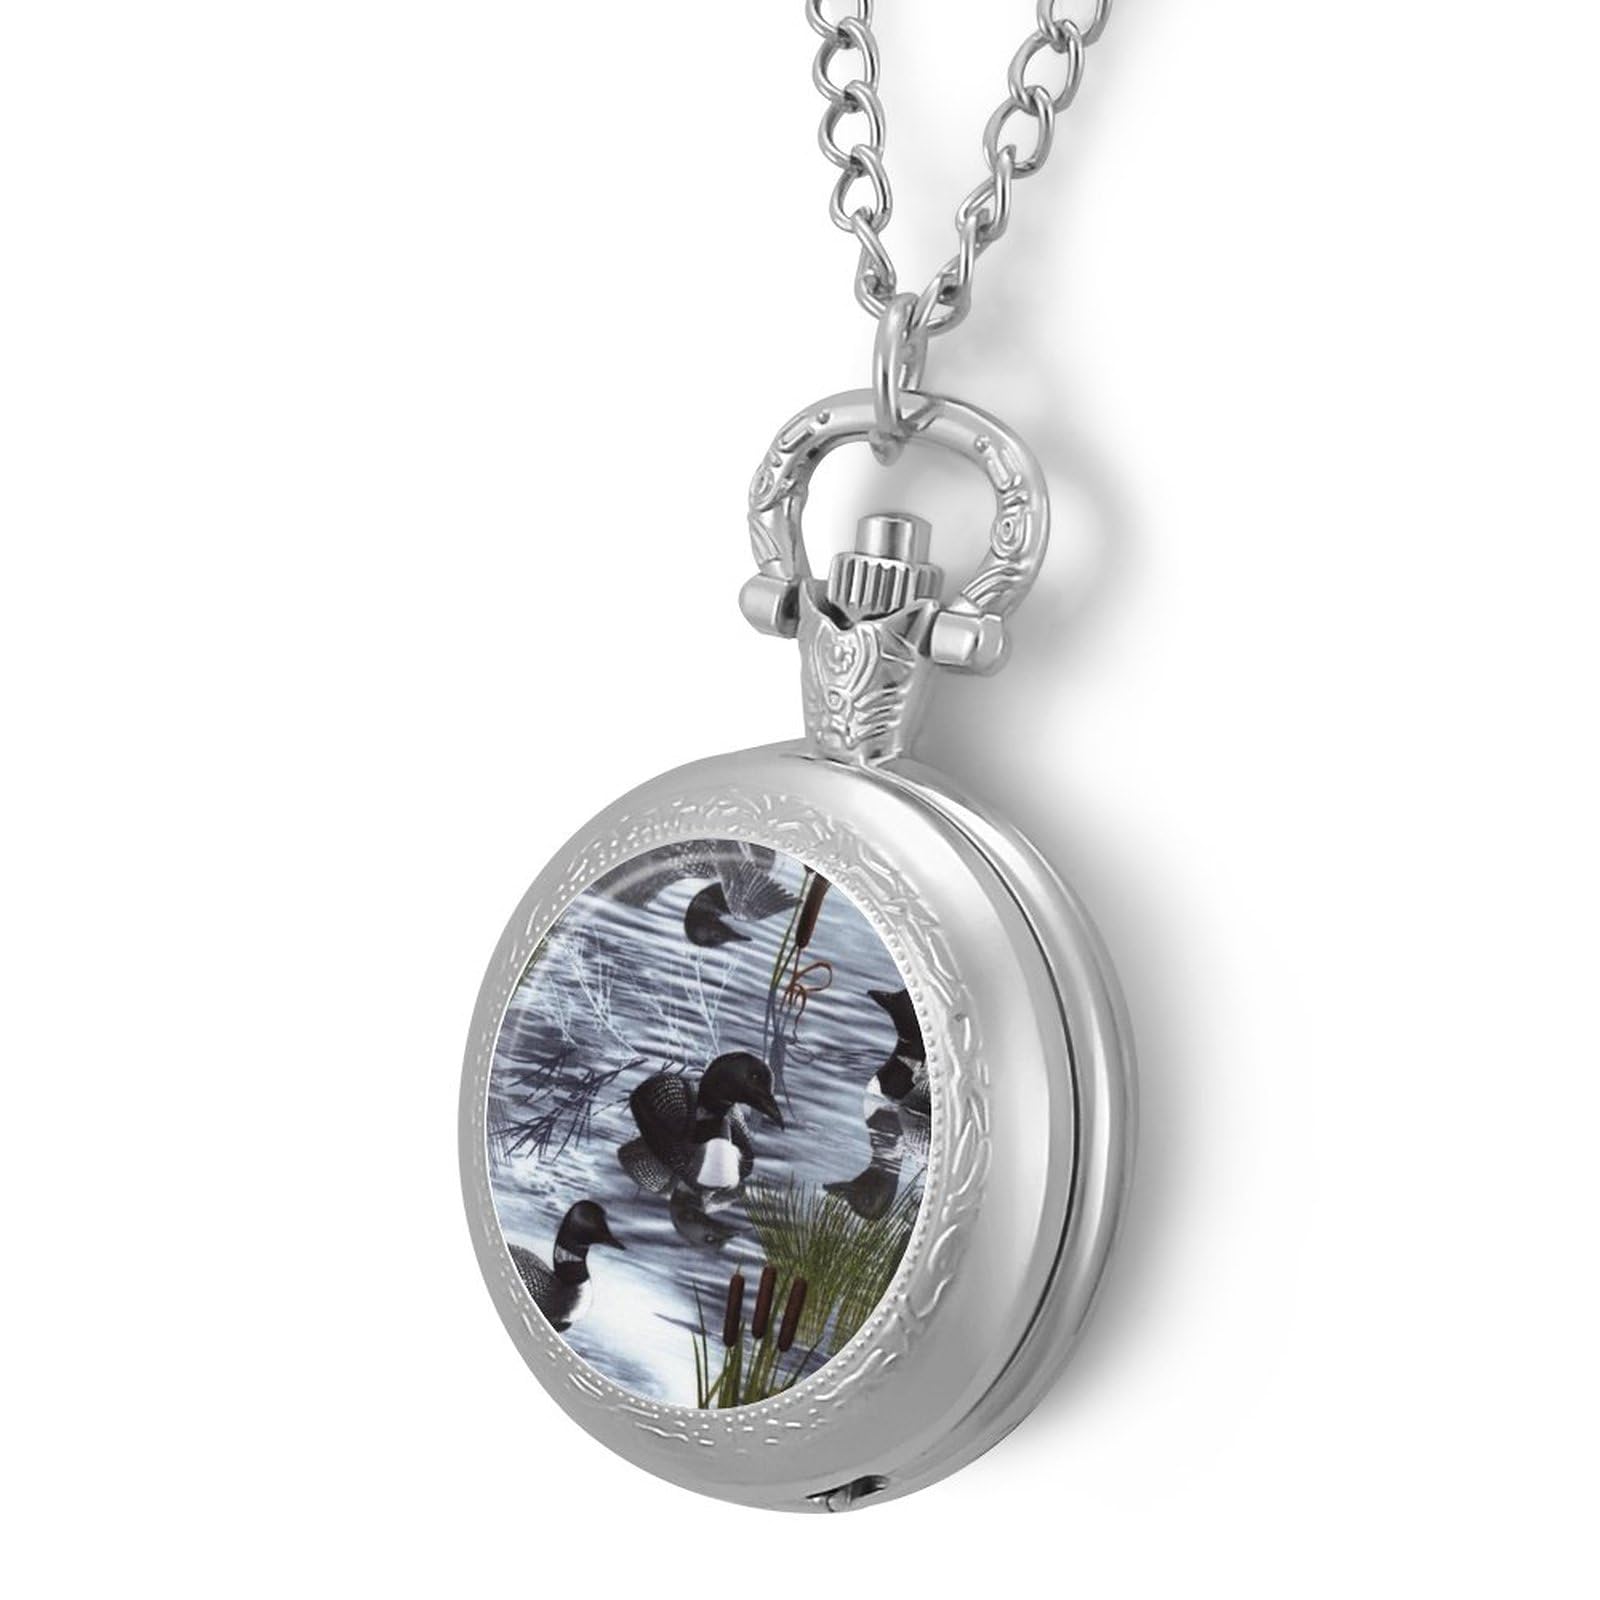 Loons Duck Vintage Pocket Watches with Chain for Men Fathers Day Xmas Present Daily Use